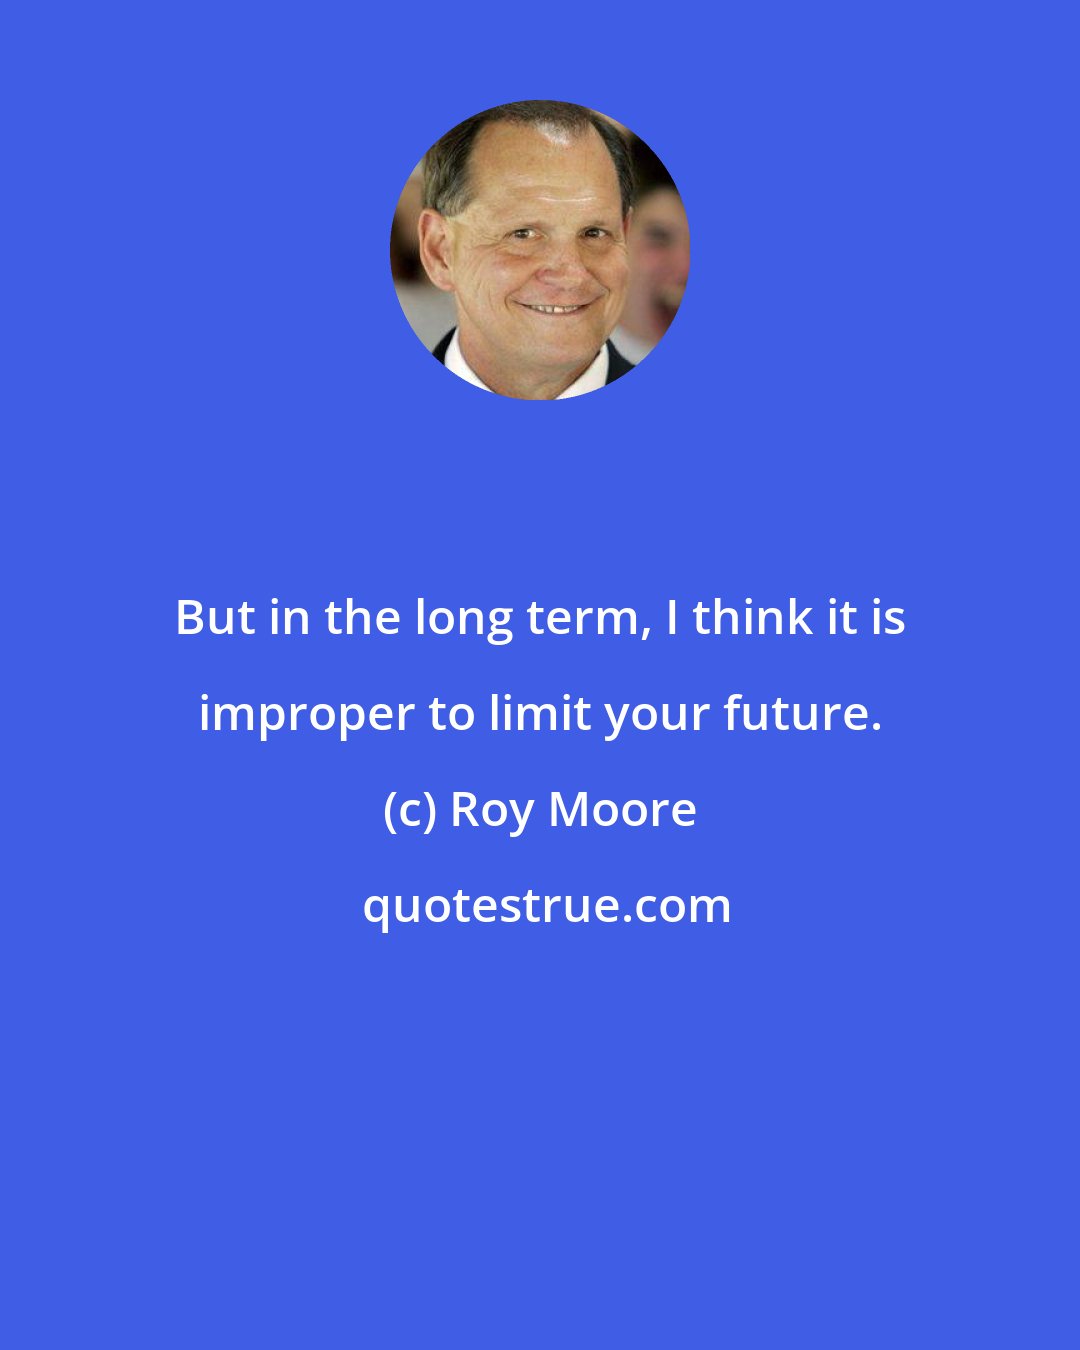 Roy Moore: But in the long term, I think it is improper to limit your future.